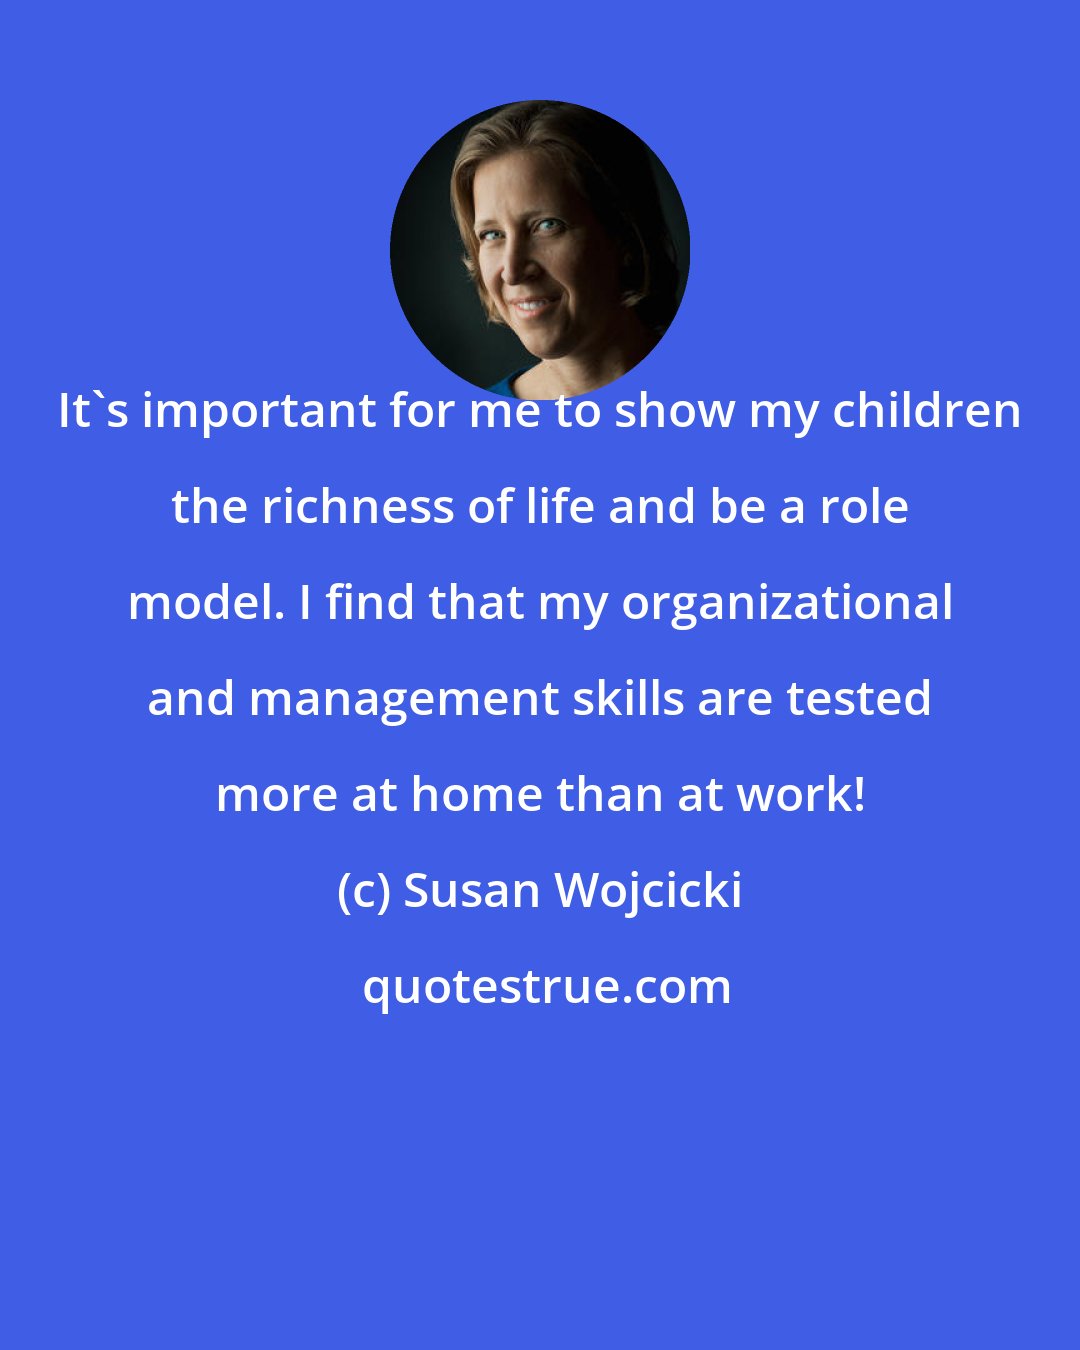 Susan Wojcicki: It's important for me to show my children the richness of life and be a role model. I find that my organizational and management skills are tested more at home than at work!